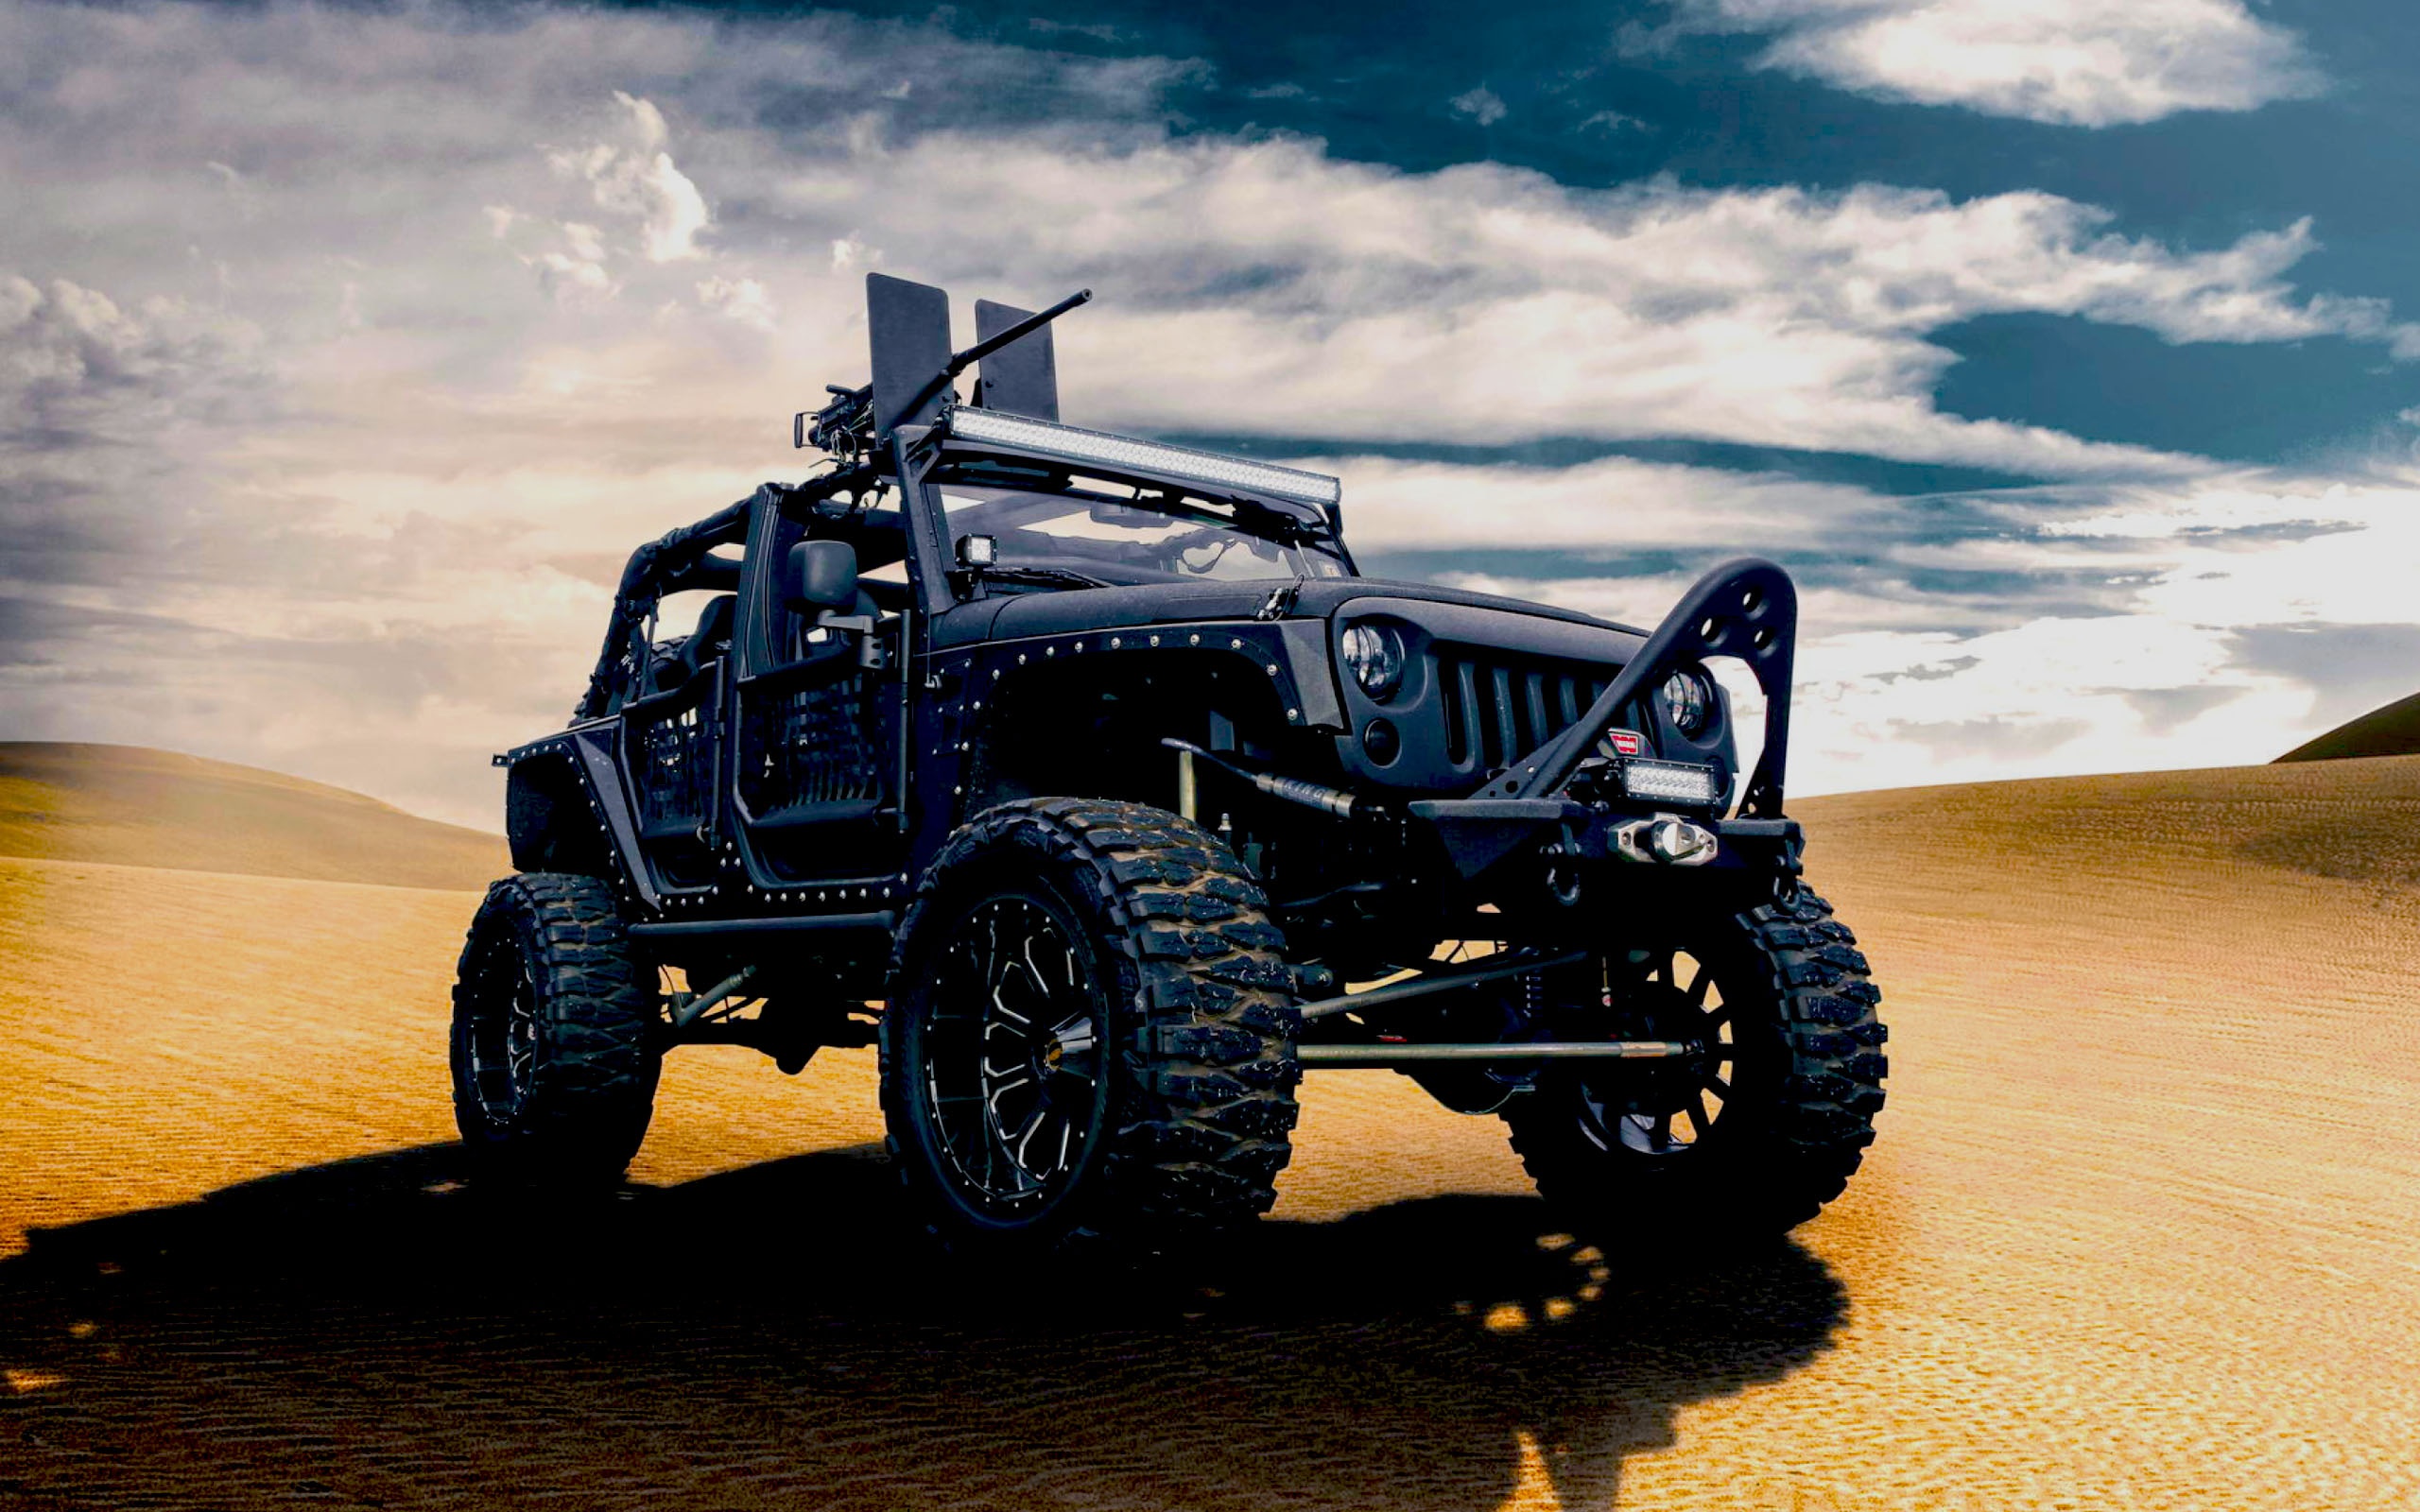 Free Download Jeep Wrangler For Army Wallpaper War And Army 2560x1600 For Your Desktop Mobile Tablet Explore 71 Jeep Wrangler Wallpaper Jeep Wrangler Wallpaper Widescreen Lifted Jeep Wrangler Wallpaper